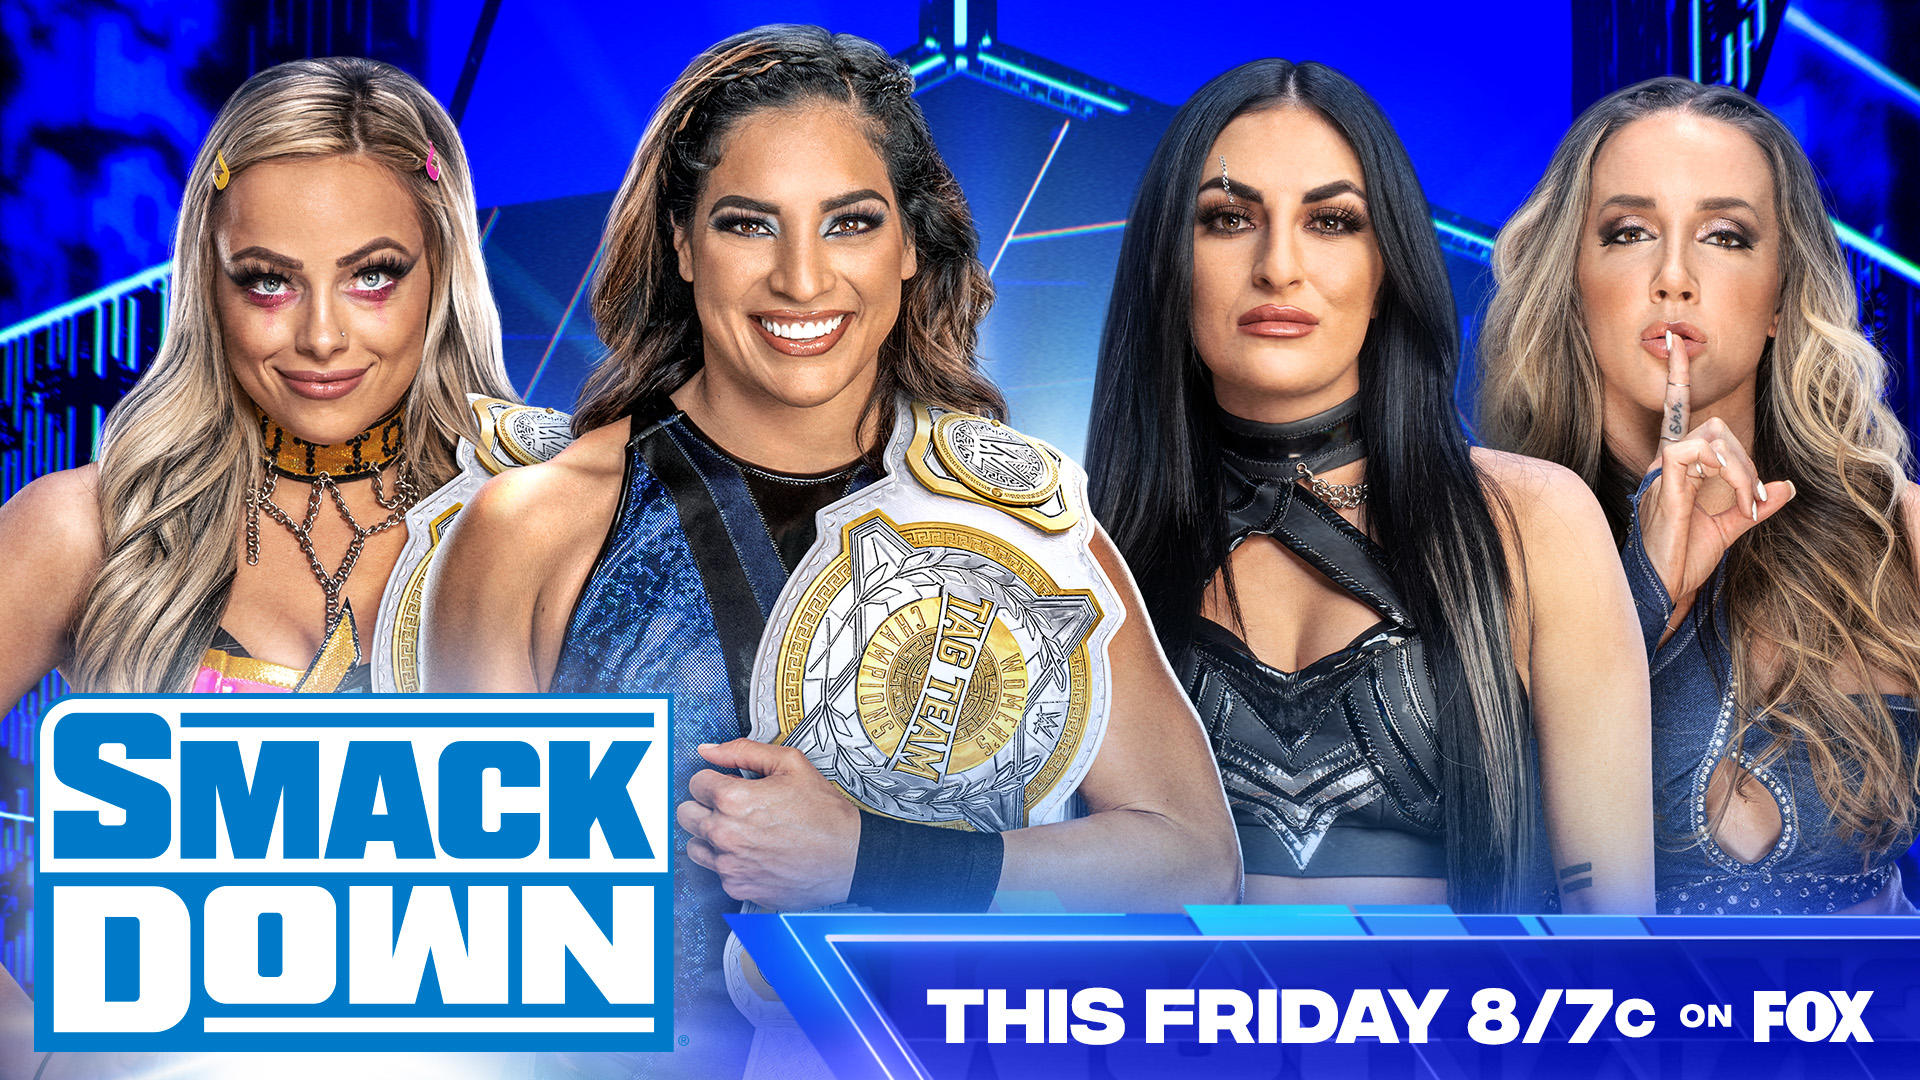 wwe smackdown title card - wwe women's tag team title match